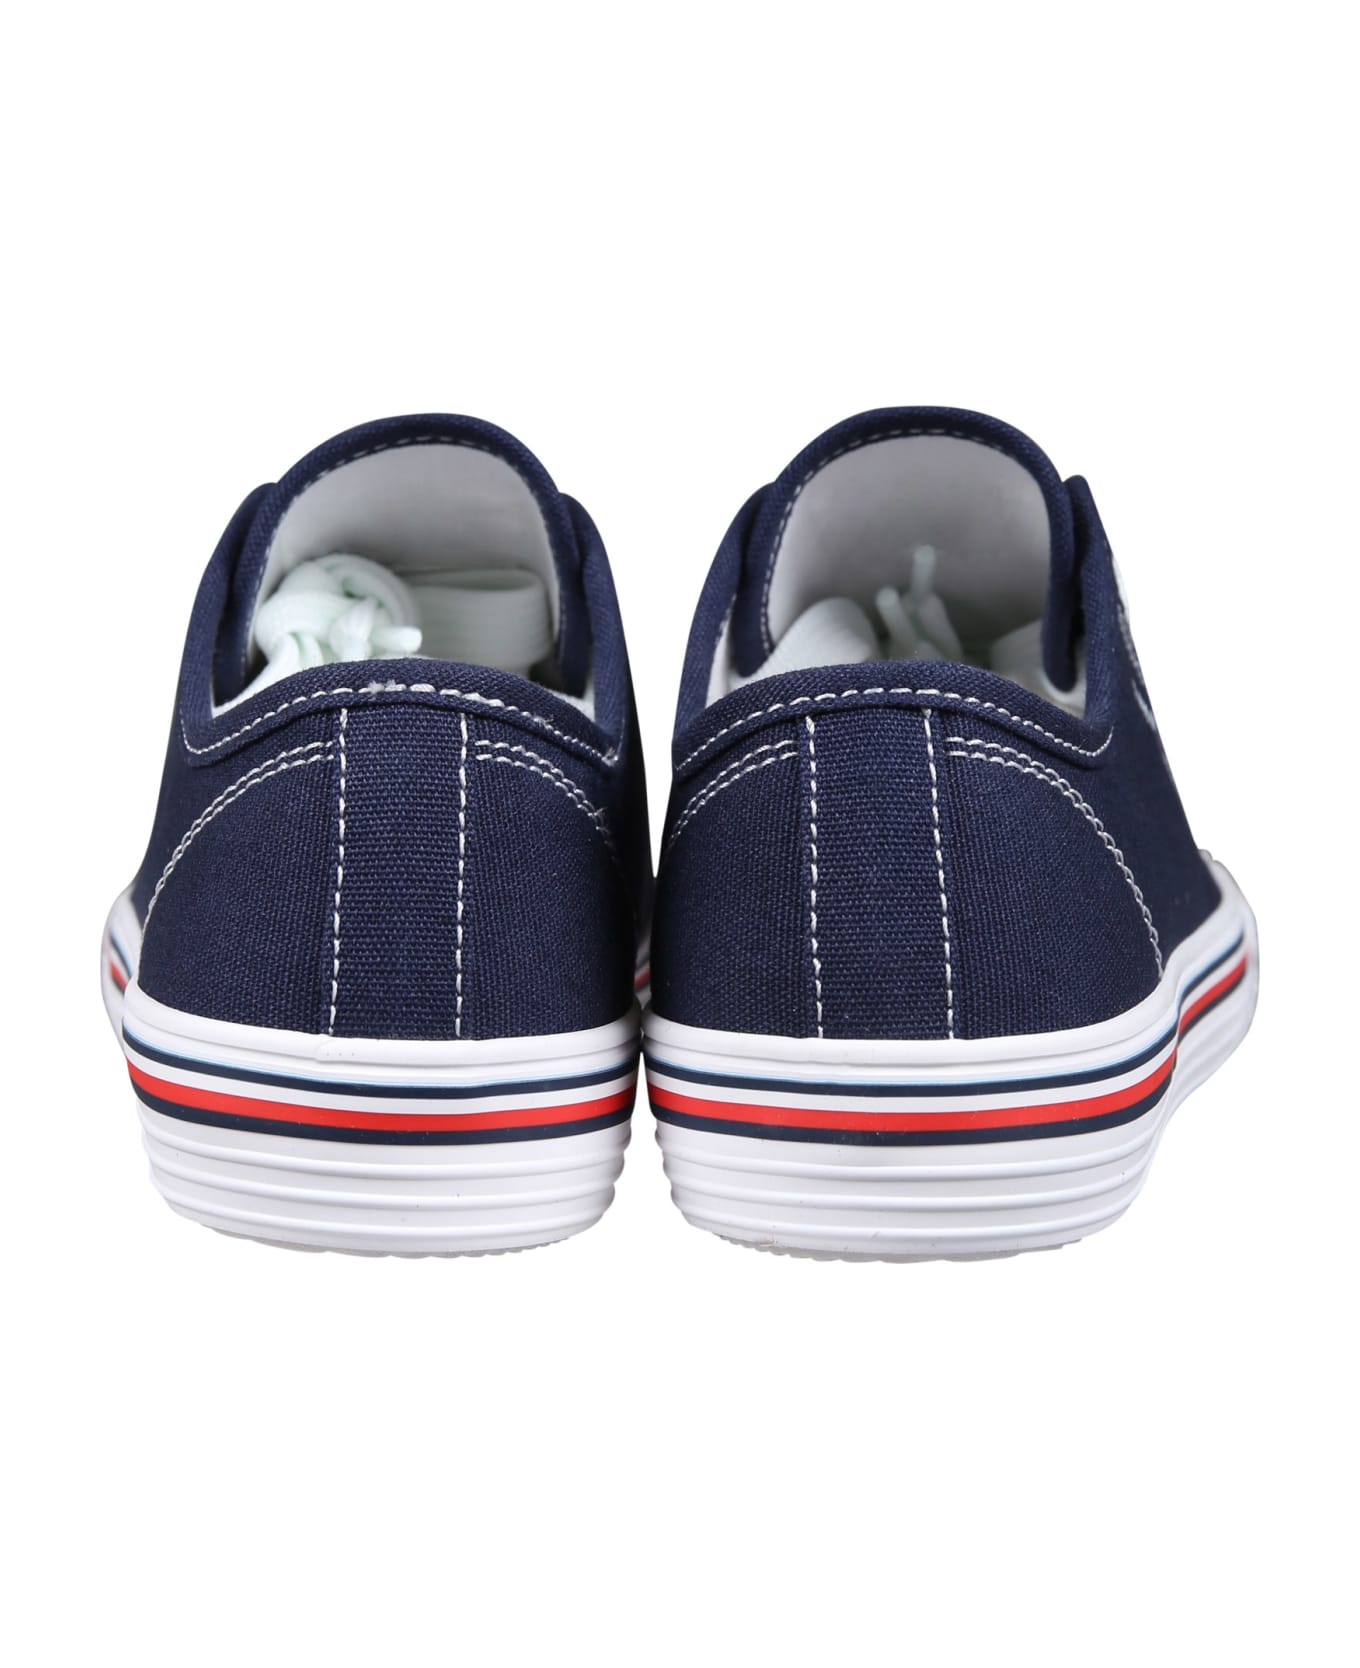 Tommy Hilfiger Blue Sneakers For Kids With Logo - Blue シューズ